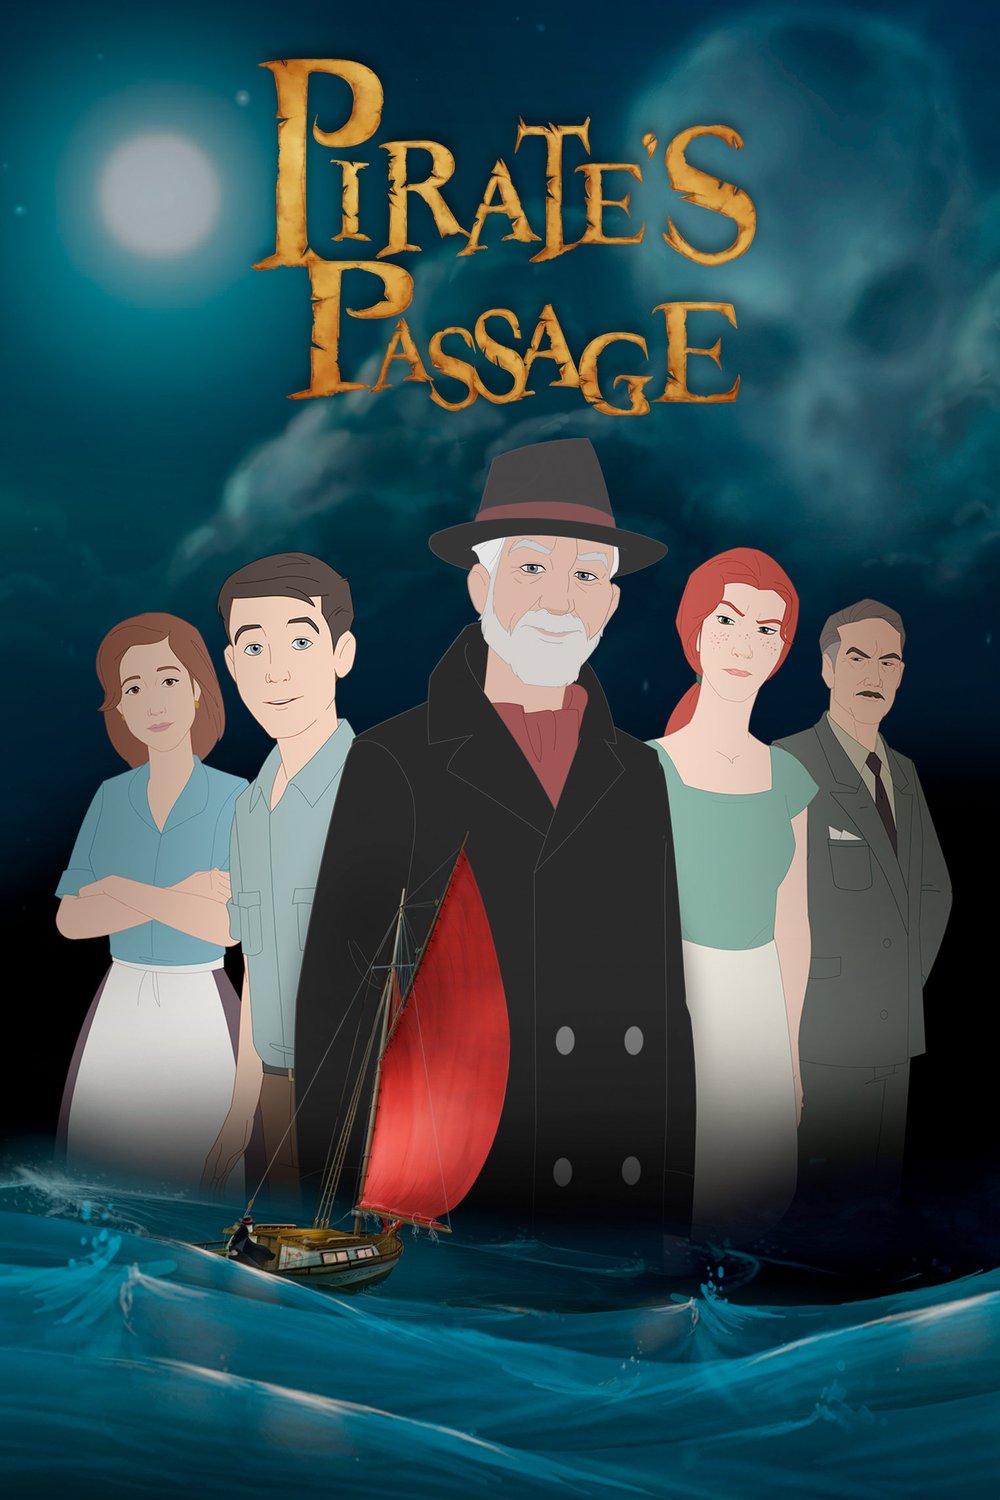 Poster of the movie Pirate's Passage